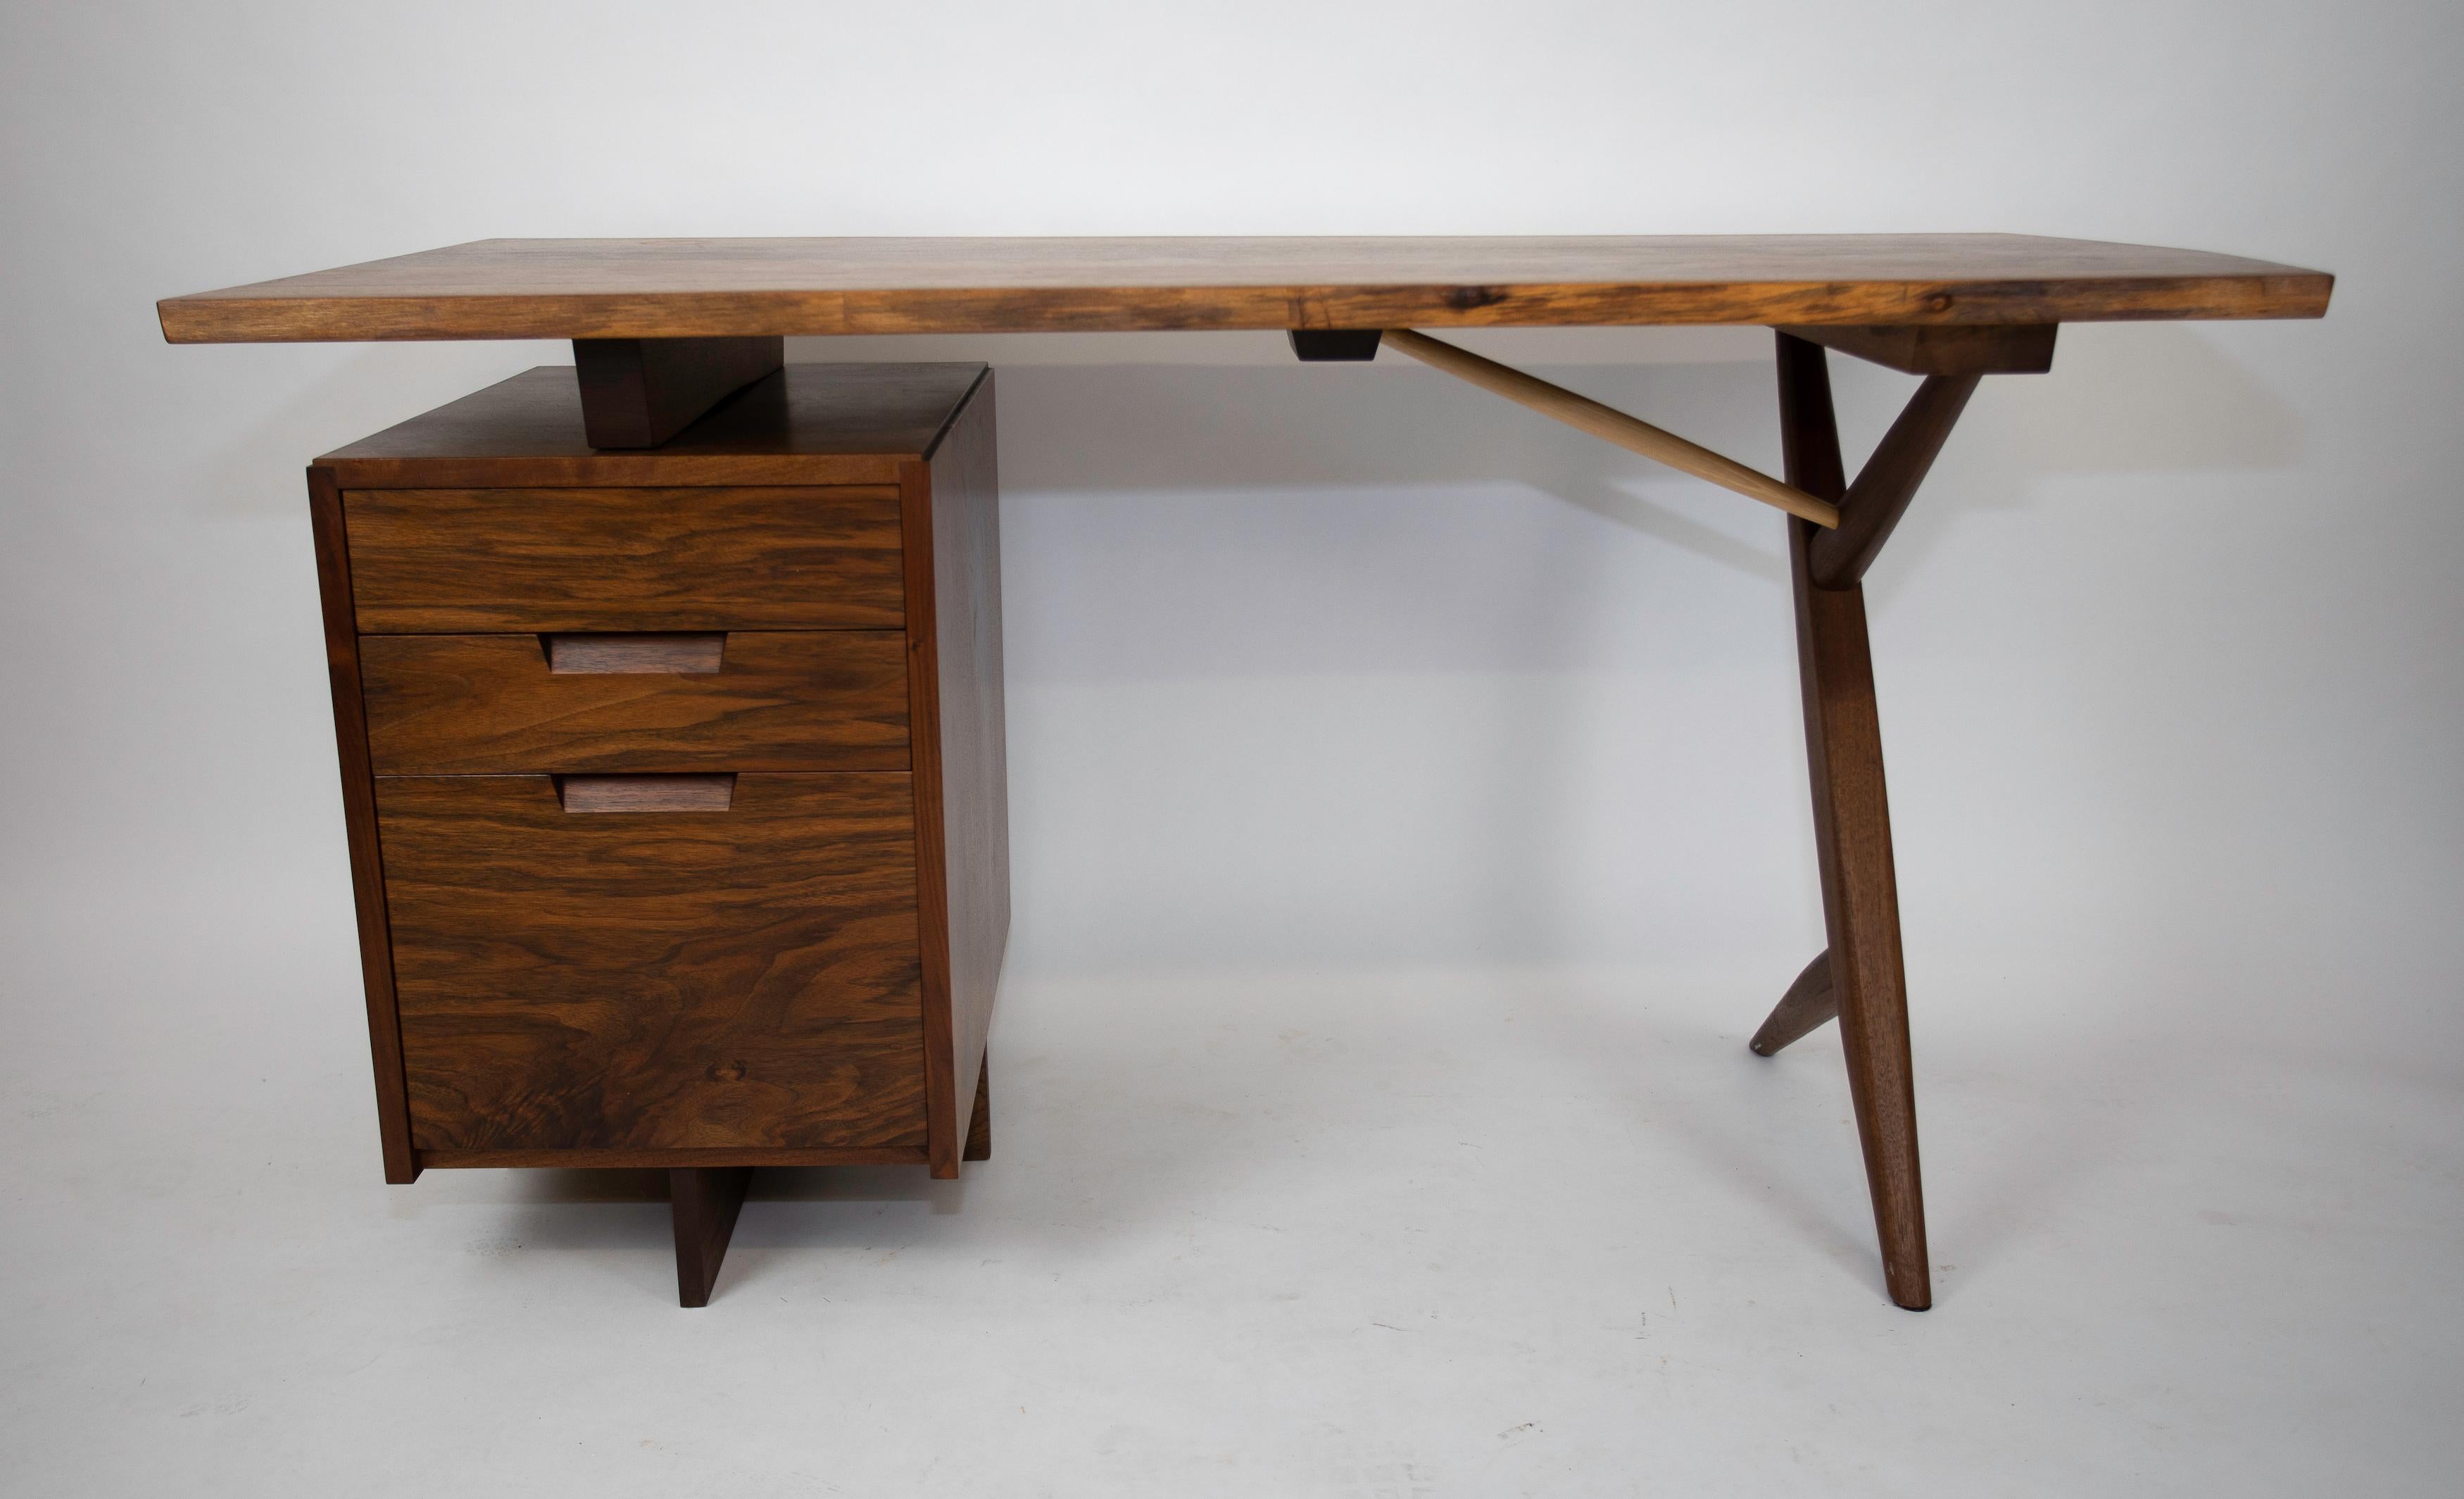 Nakashima Studios Conoid Desk
Commissioned in 2000 for the Davidson Family
Wonderful selection of wood
Signed Mira Nakashima and Dated, clients name 
Original Surface.